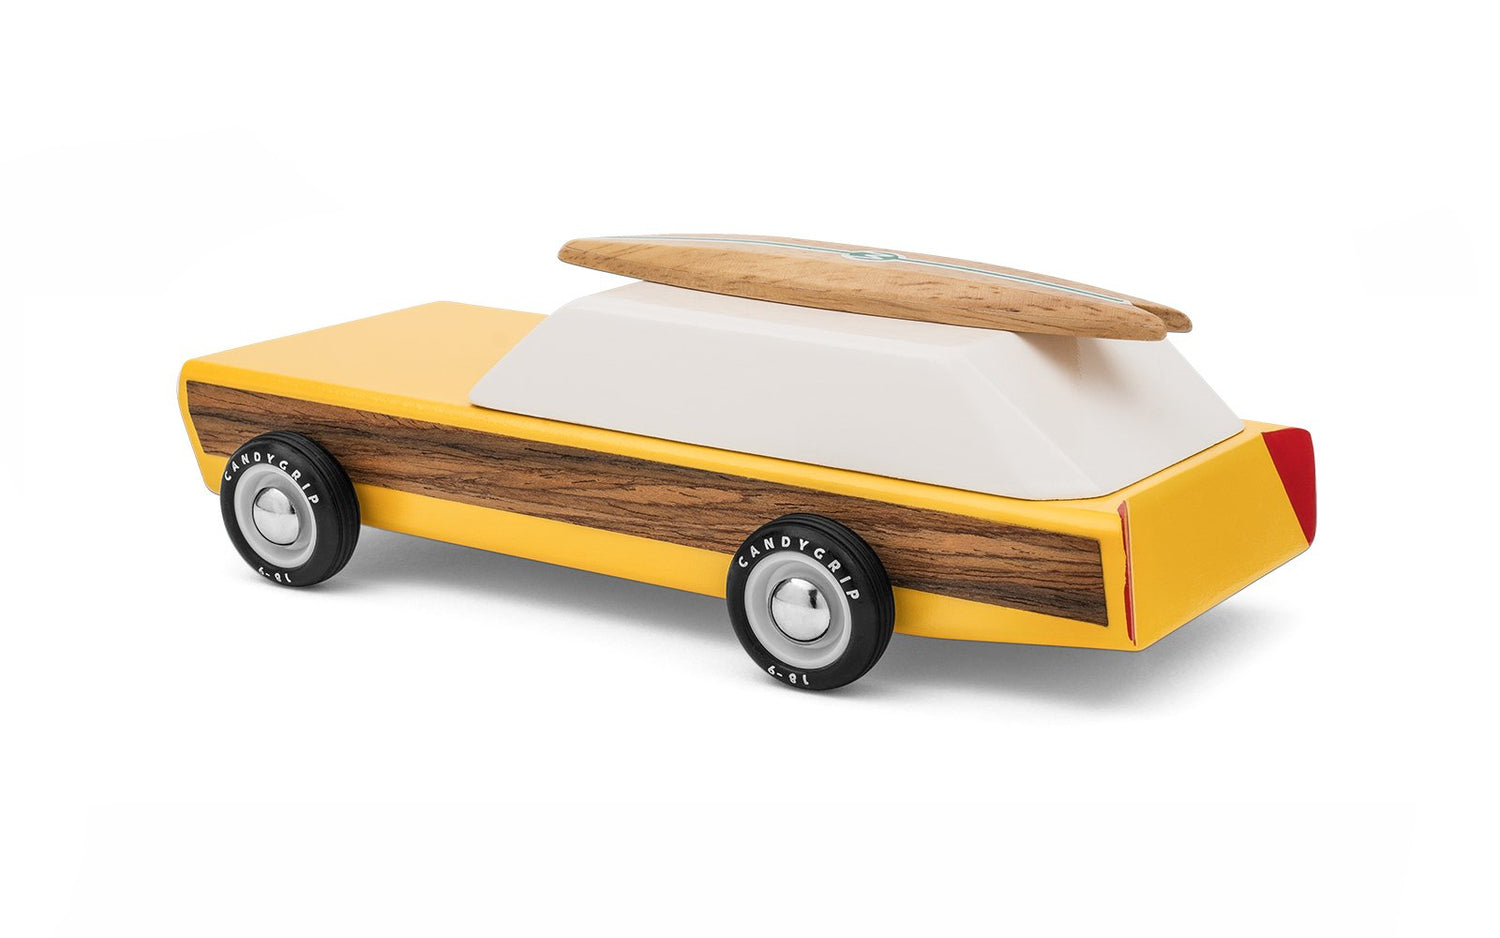 Woodie classic toy car by Candylab Toys. Includes surfboard.